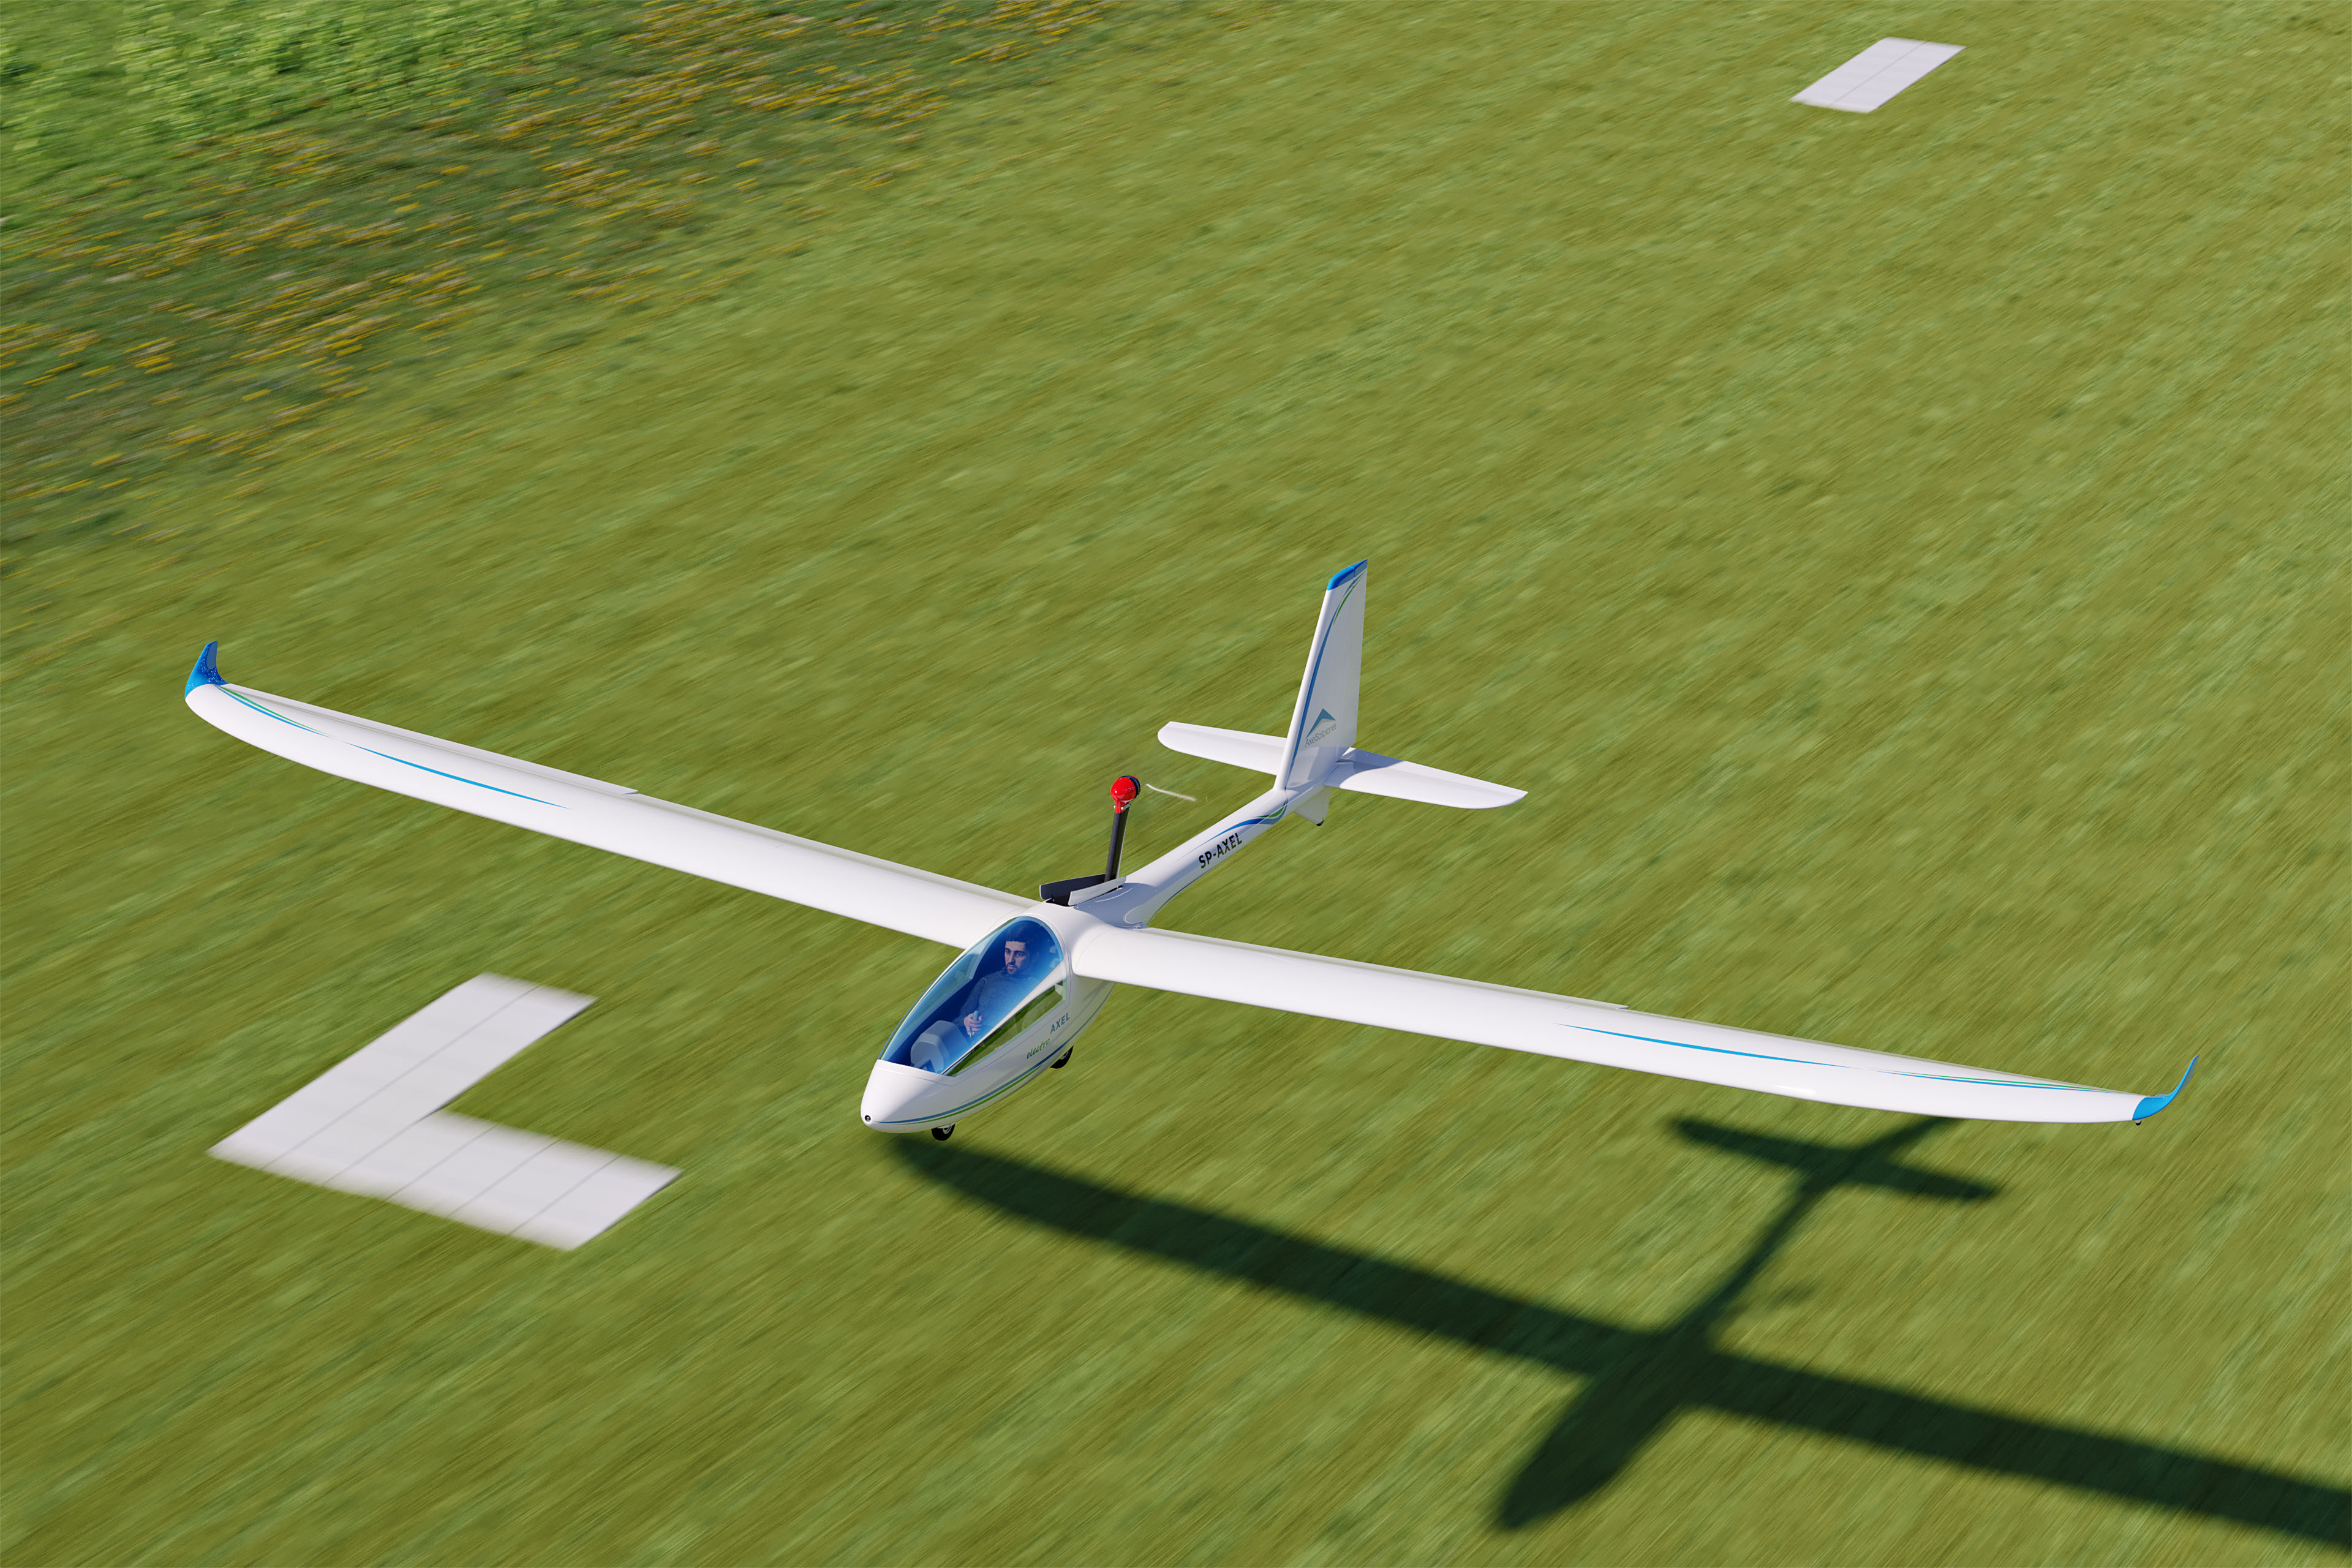 3D rendering visualization of the taking off Axel glider on the end of the grass runway.